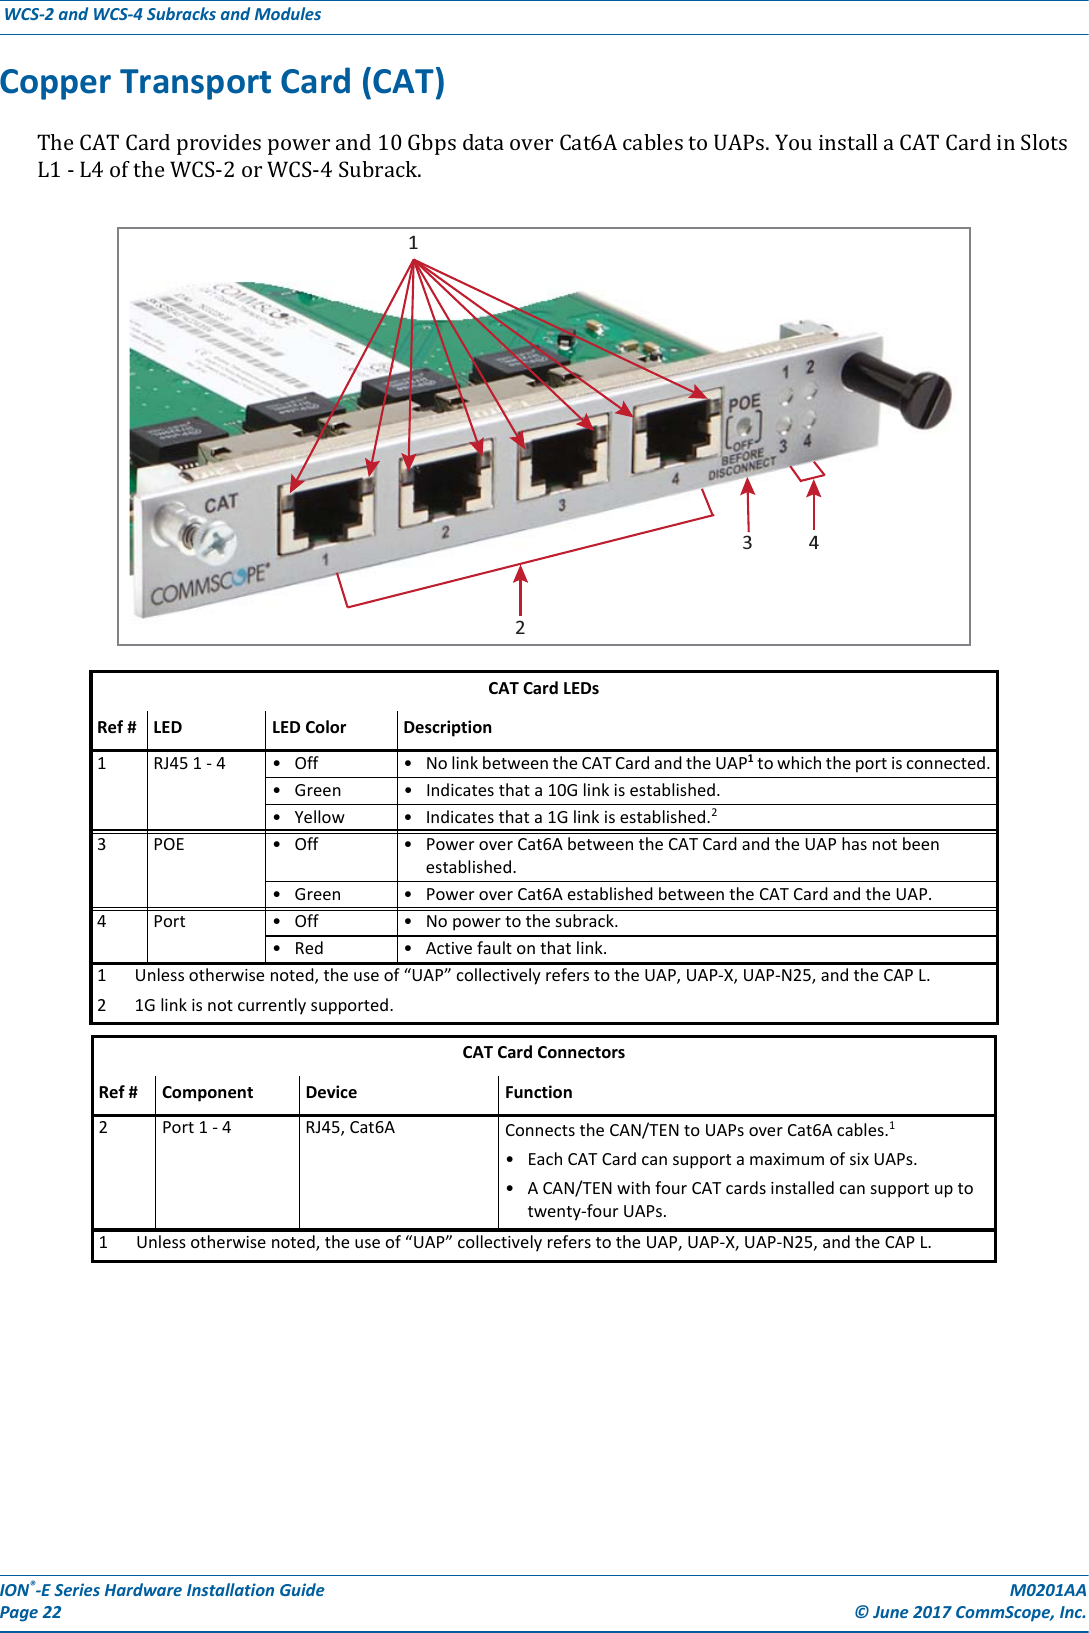 ION®-E Series Hardware Installation Guide M0201AA Page 22 © June 2017 CommScope, Inc. WCS-2 and WCS-4 Subracks and Modules  Copper Transport Card (CAT)TheCATCardprovidespowerand10GbpsdataoverCat6AcablestoUAPs.YouinstallaCATCardinSlotsL1-L4oftheWCS-2orWCS-4Subrack.CAT Card LEDsRef # LED LED Color Description1 RJ45 1 - 4 • Off • No link between the CAT Card and the UAP1 to which the port is connected.• Green • Indicates that a 10G link is established.• Yellow • Indicates that a 1G link is established.2 3 POE •Off •Power over Cat6A between the CAT Card and the UAP has not been established.•Green •Power over Cat6A established between the CAT Card and the UAP.4 Port • Off • No power to the subrack.•Red •Active fault on that link.1 Unless otherwise noted, the use of “UAP” collectively refers to the UAP, UAP-X, UAP-N25, and the CAP L.2 1G link is not currently supported.CAT Card ConnectorsRef # Component Device Function2 Port 1 - 4 RJ45, Cat6A Connects the CAN/TEN to UAPs over Cat6A cables.1 • Each CAT Card can support a maximum of six UAPs.• A CAN/TEN with four CAT cards installed can support up to twenty-four UAPs. 1 Unless otherwise noted, the use of “UAP” collectively refers to the UAP, UAP-X, UAP-N25, and the CAP L.2134